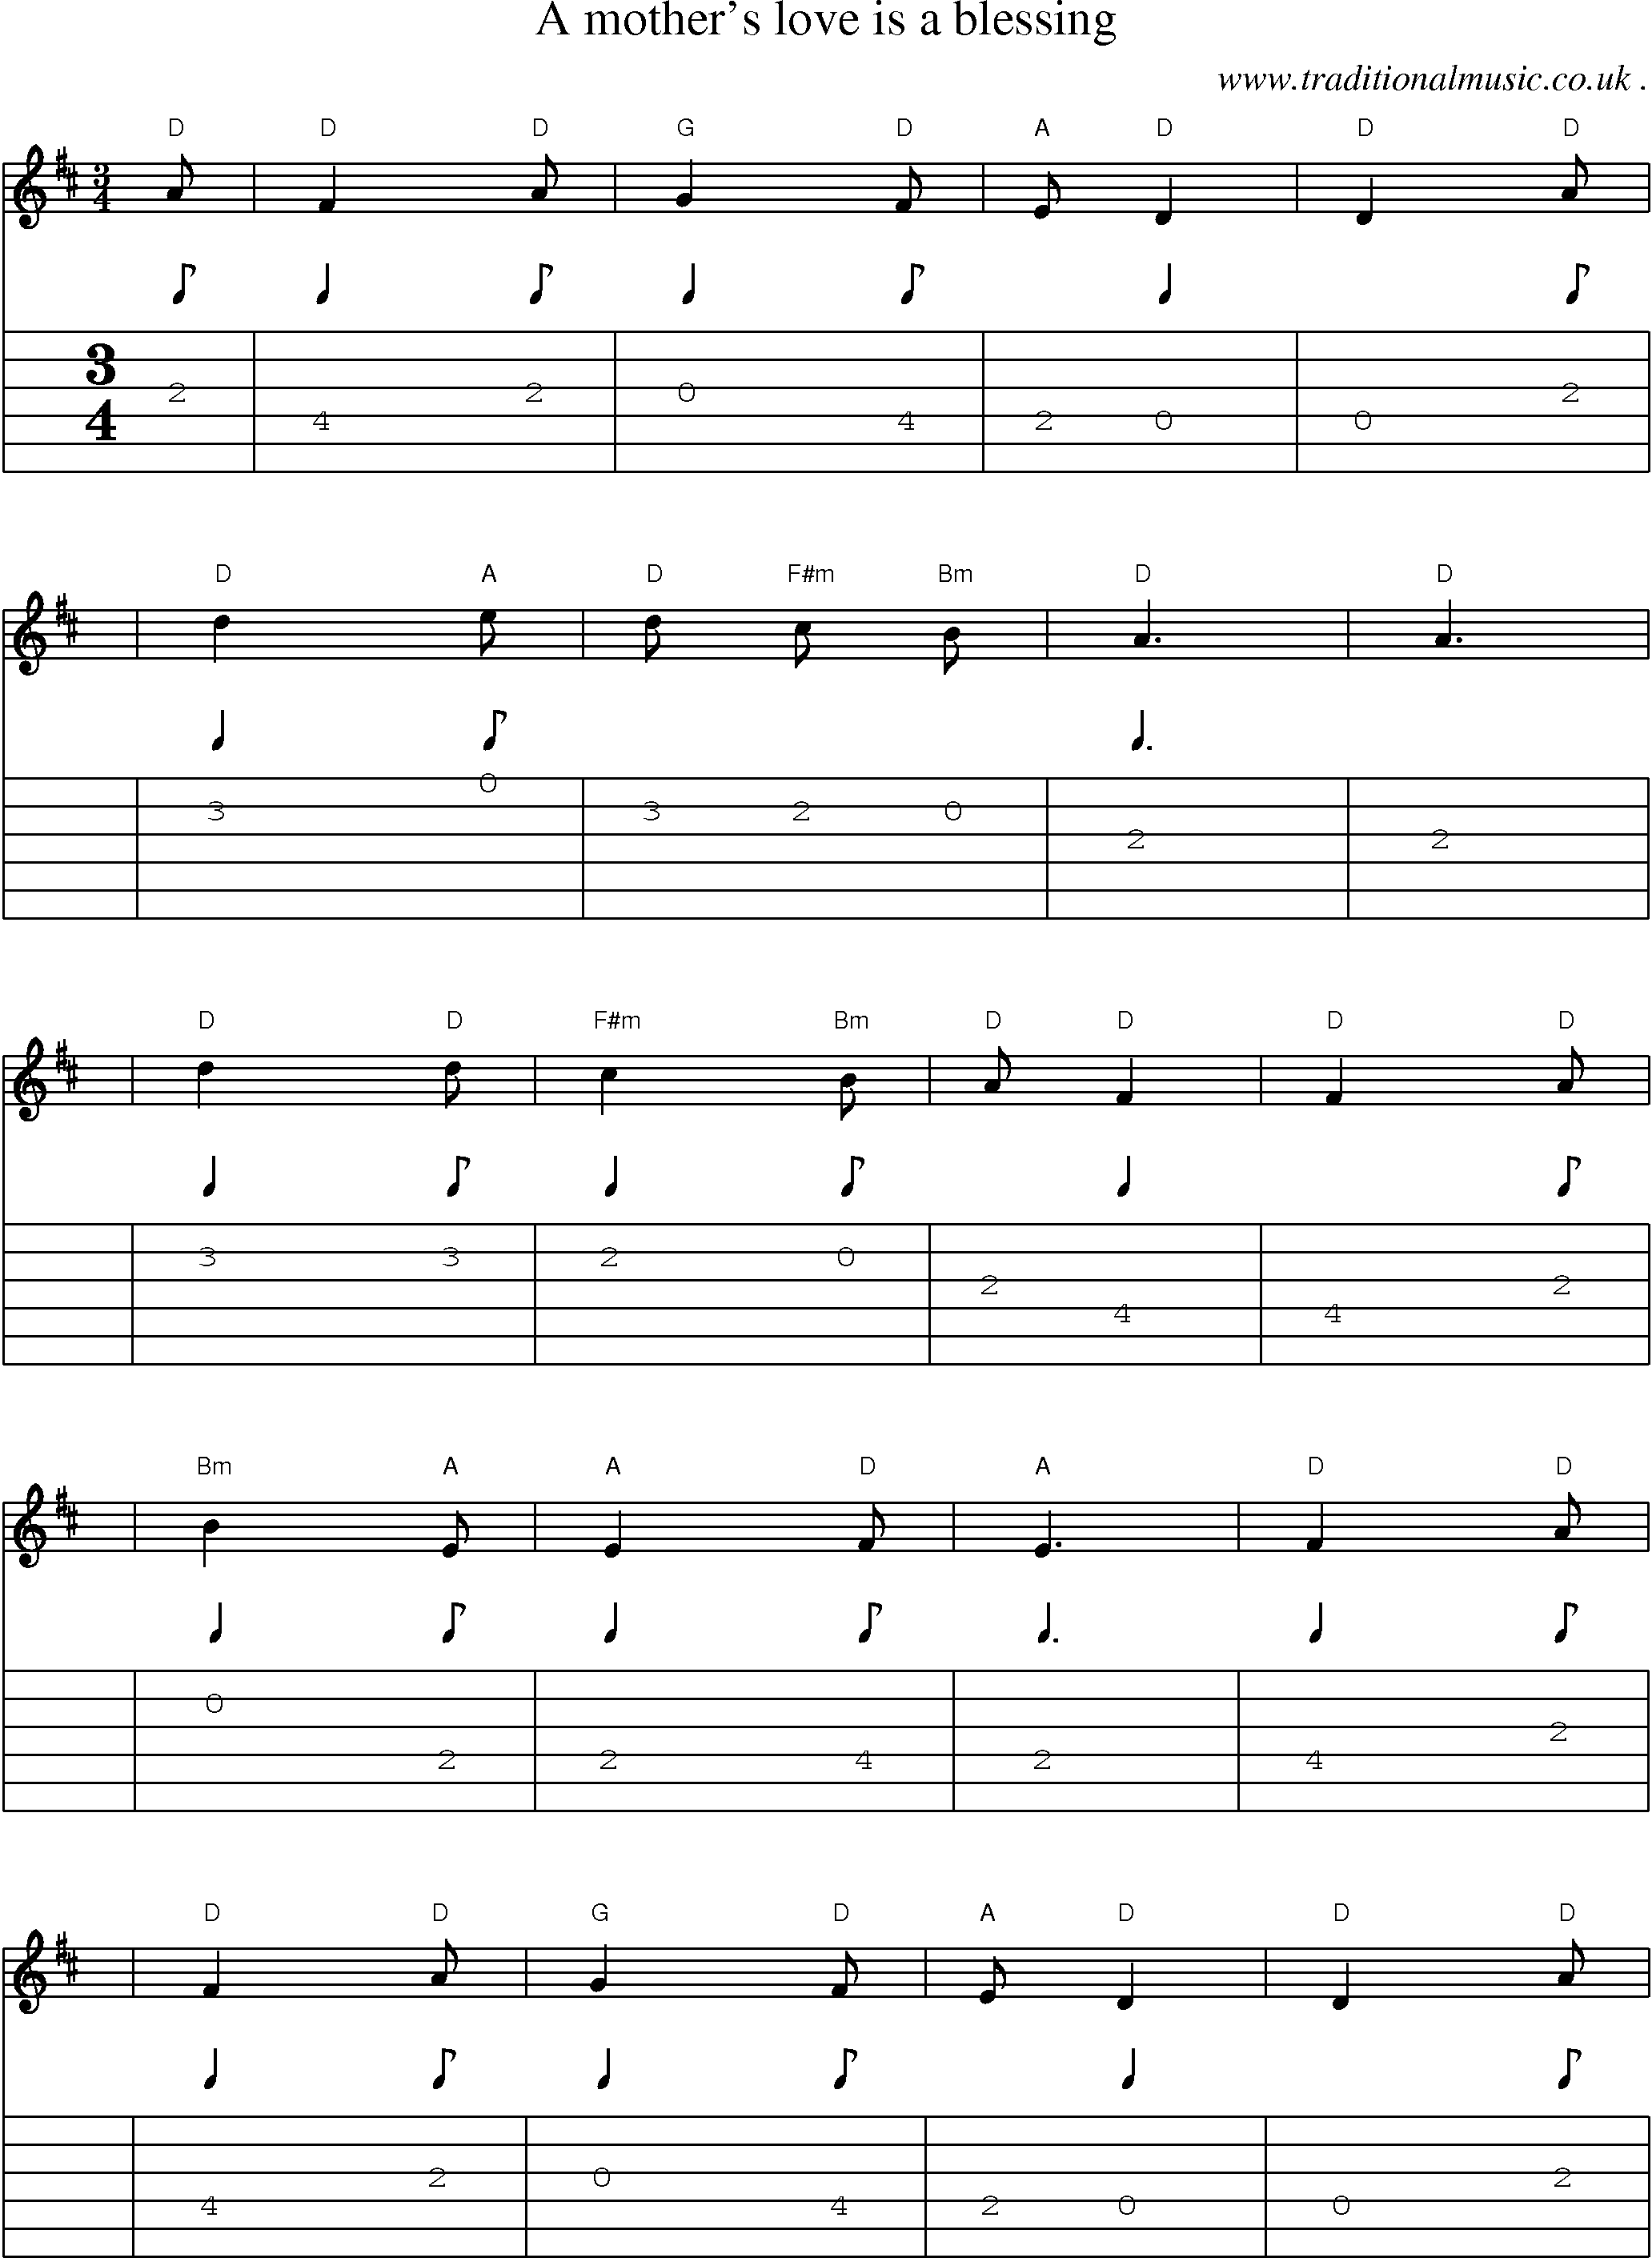 Sheet-music  score, Chords and Guitar Tabs for A Mothers Love Is A Blessing